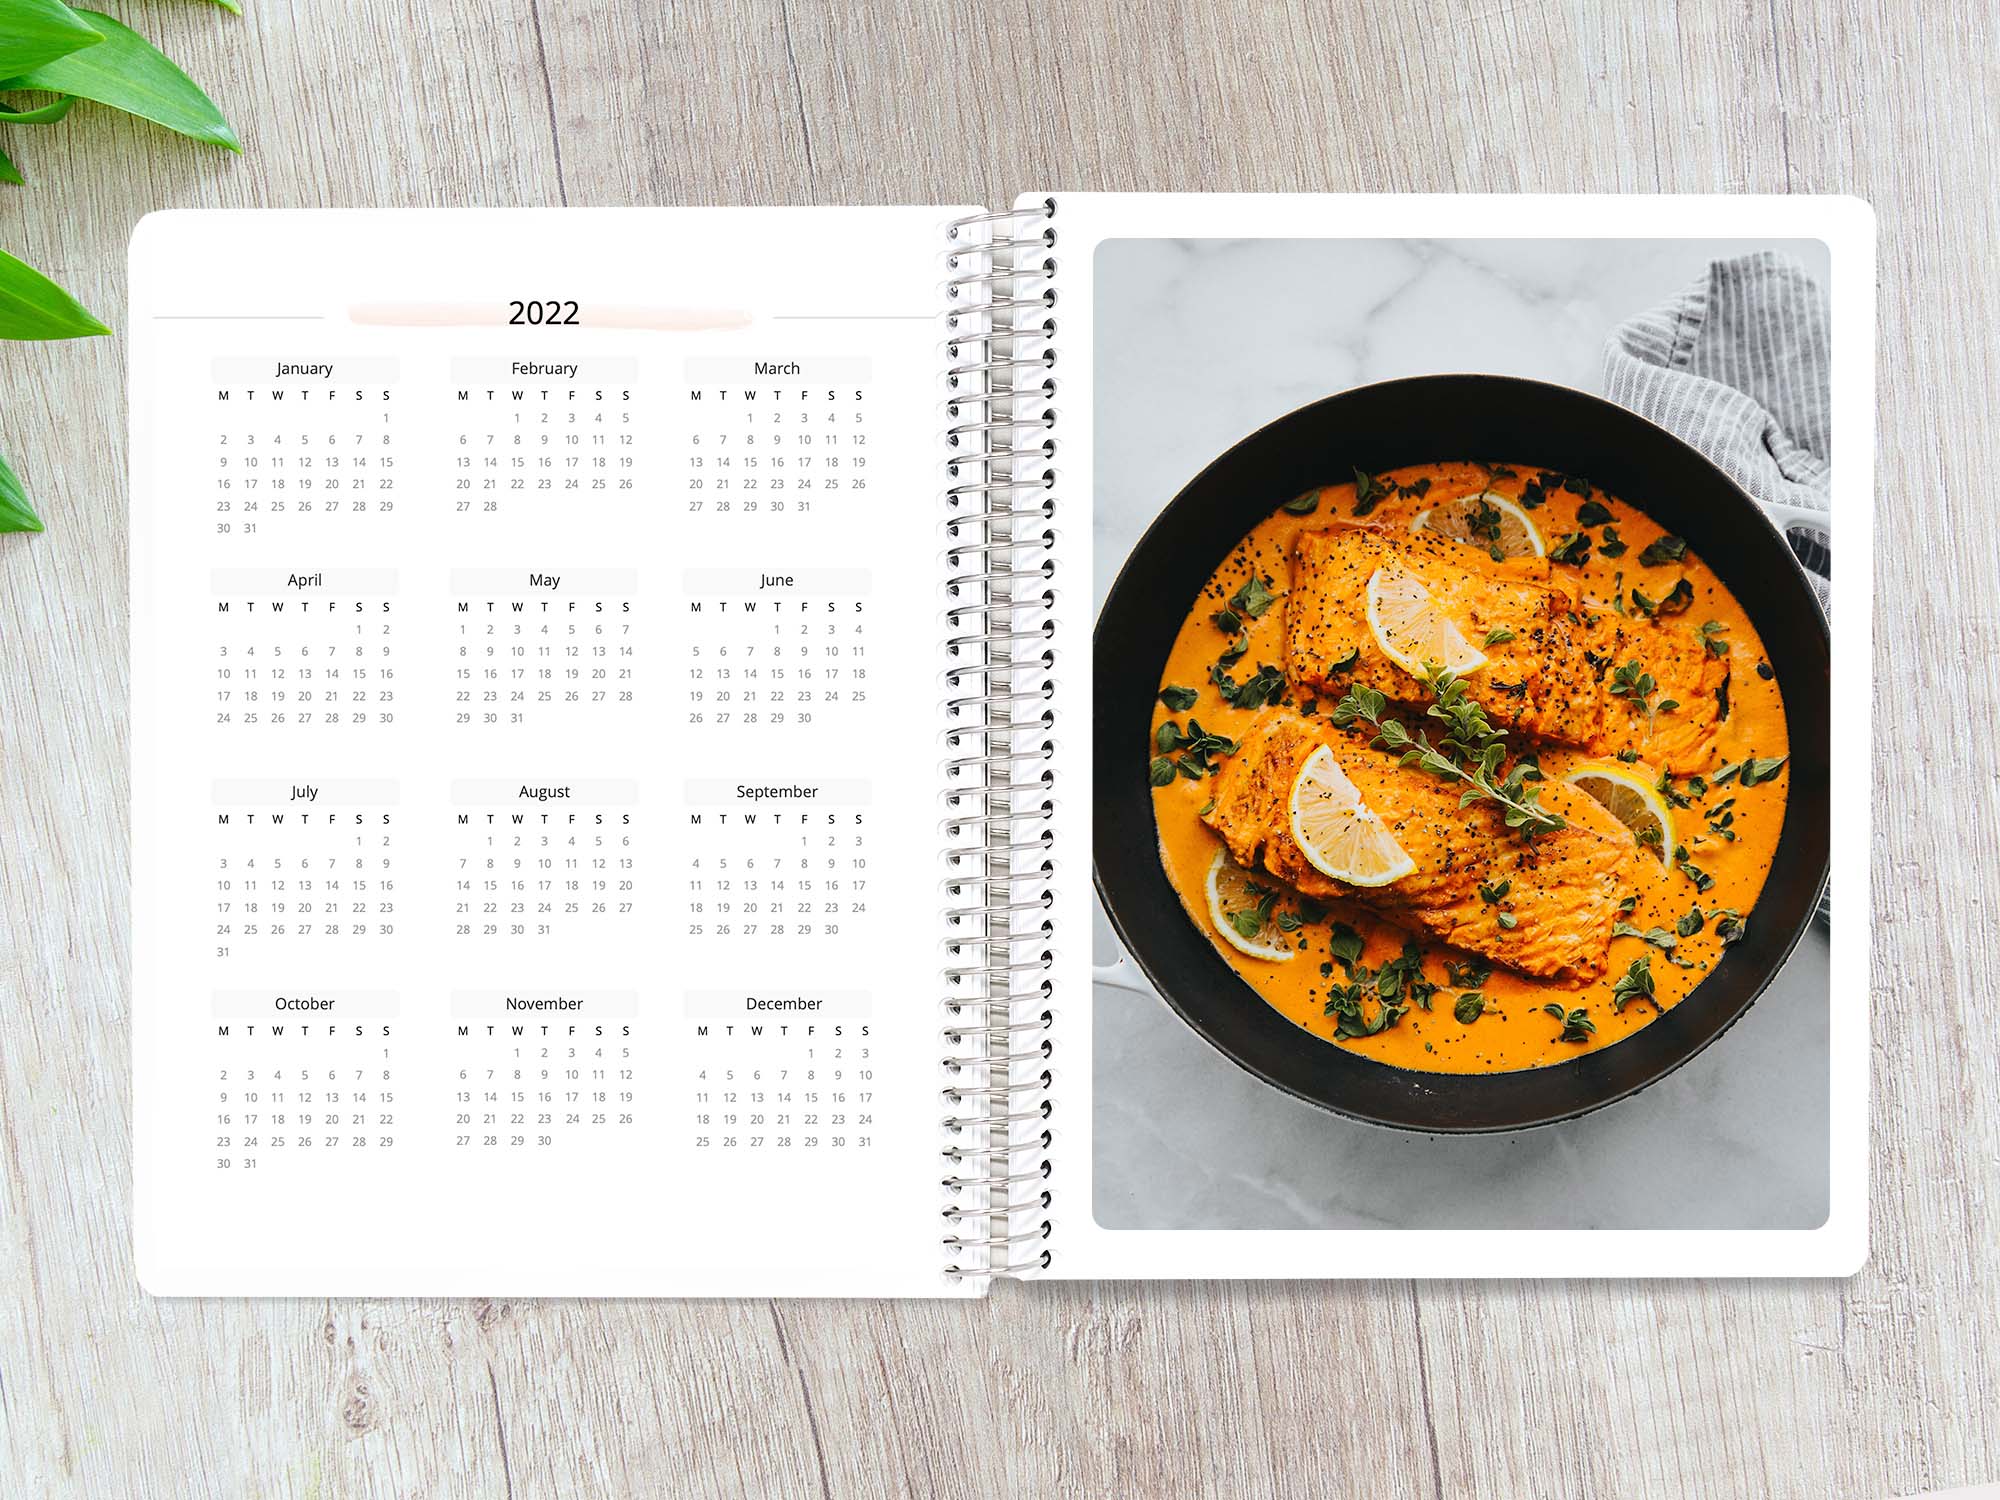 Lifephoto Meal Planner